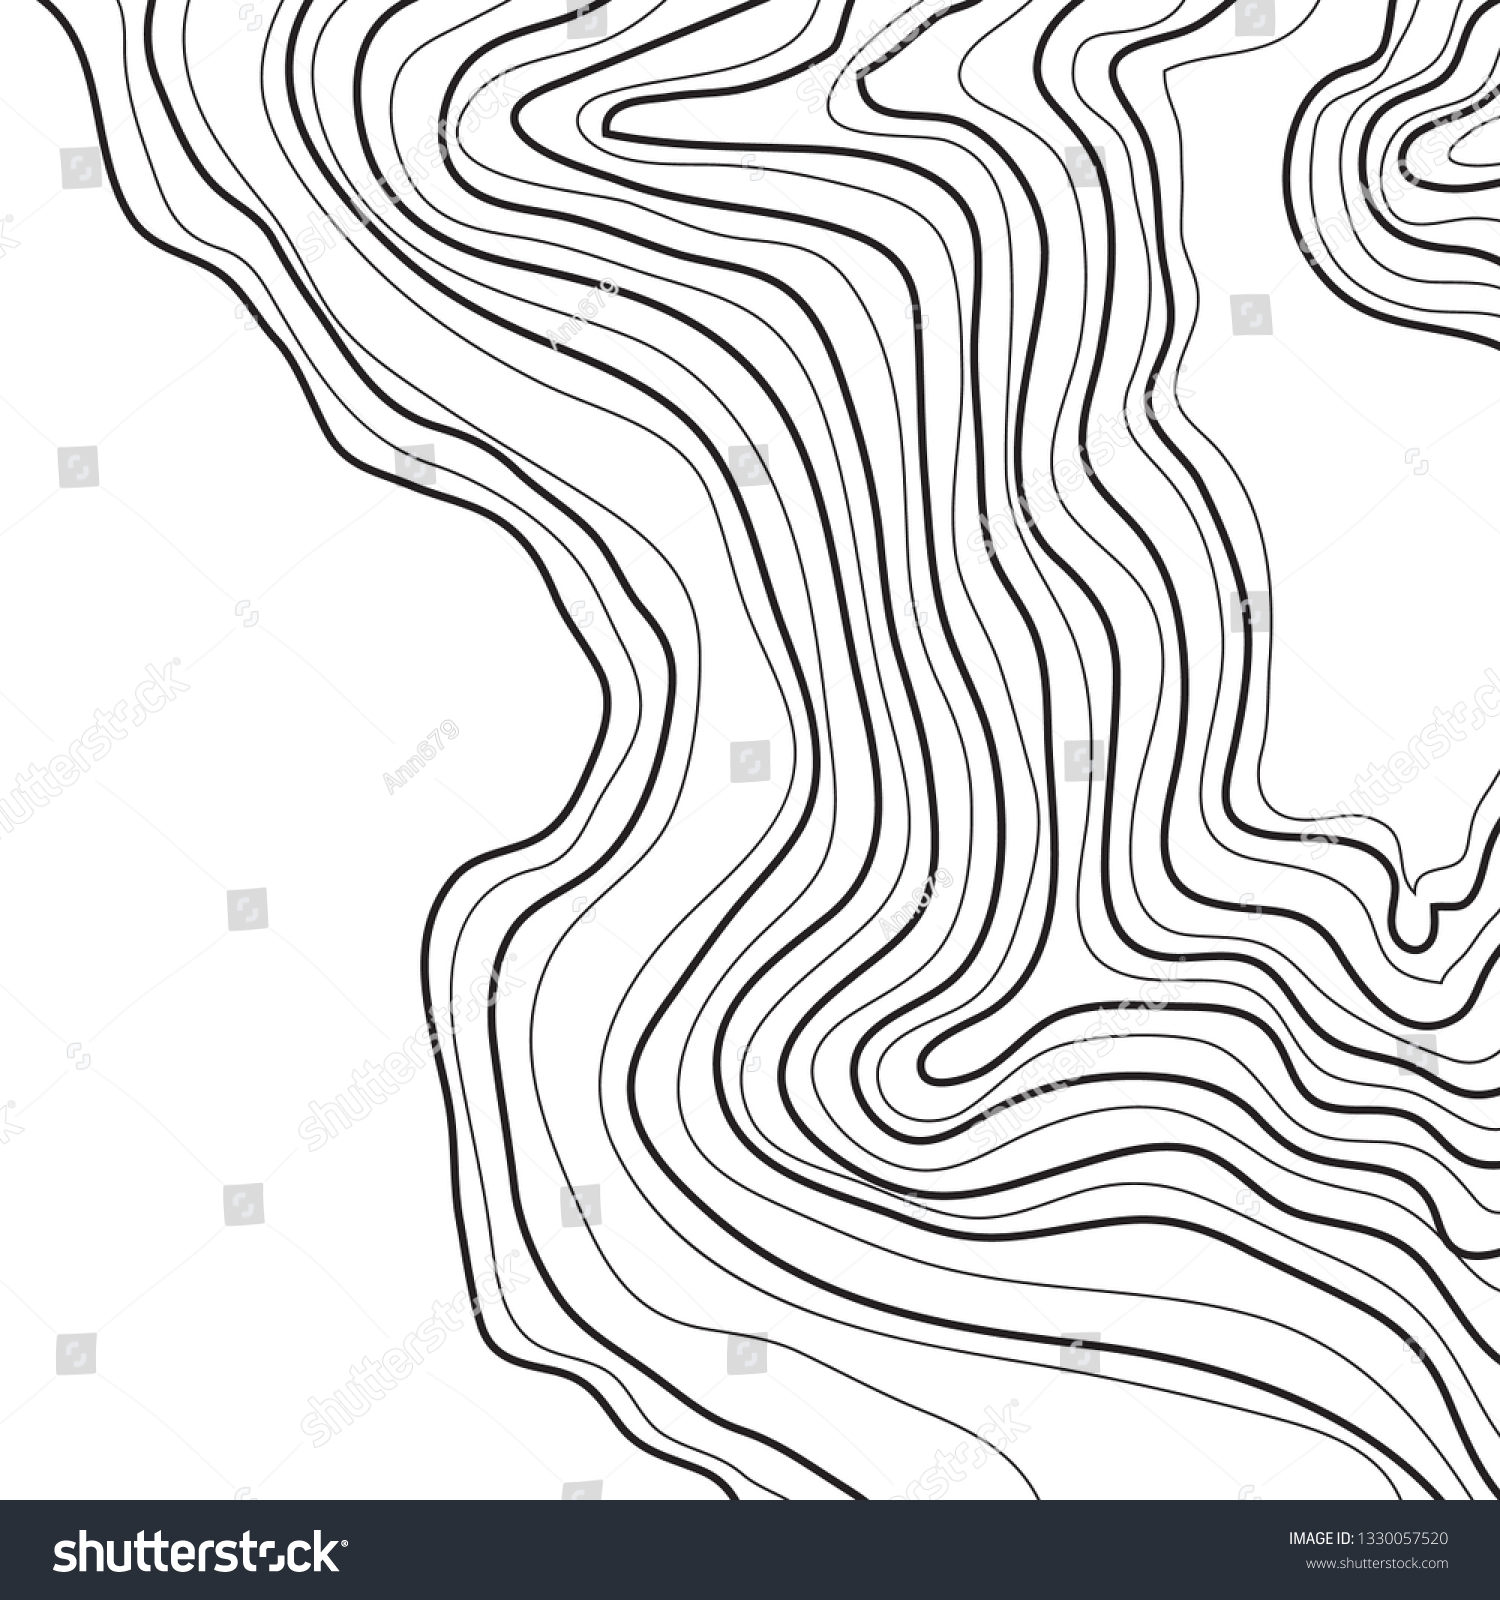 Stock Vector Topographic Map Elevation Lines Black On White Background Vector 1330057520 